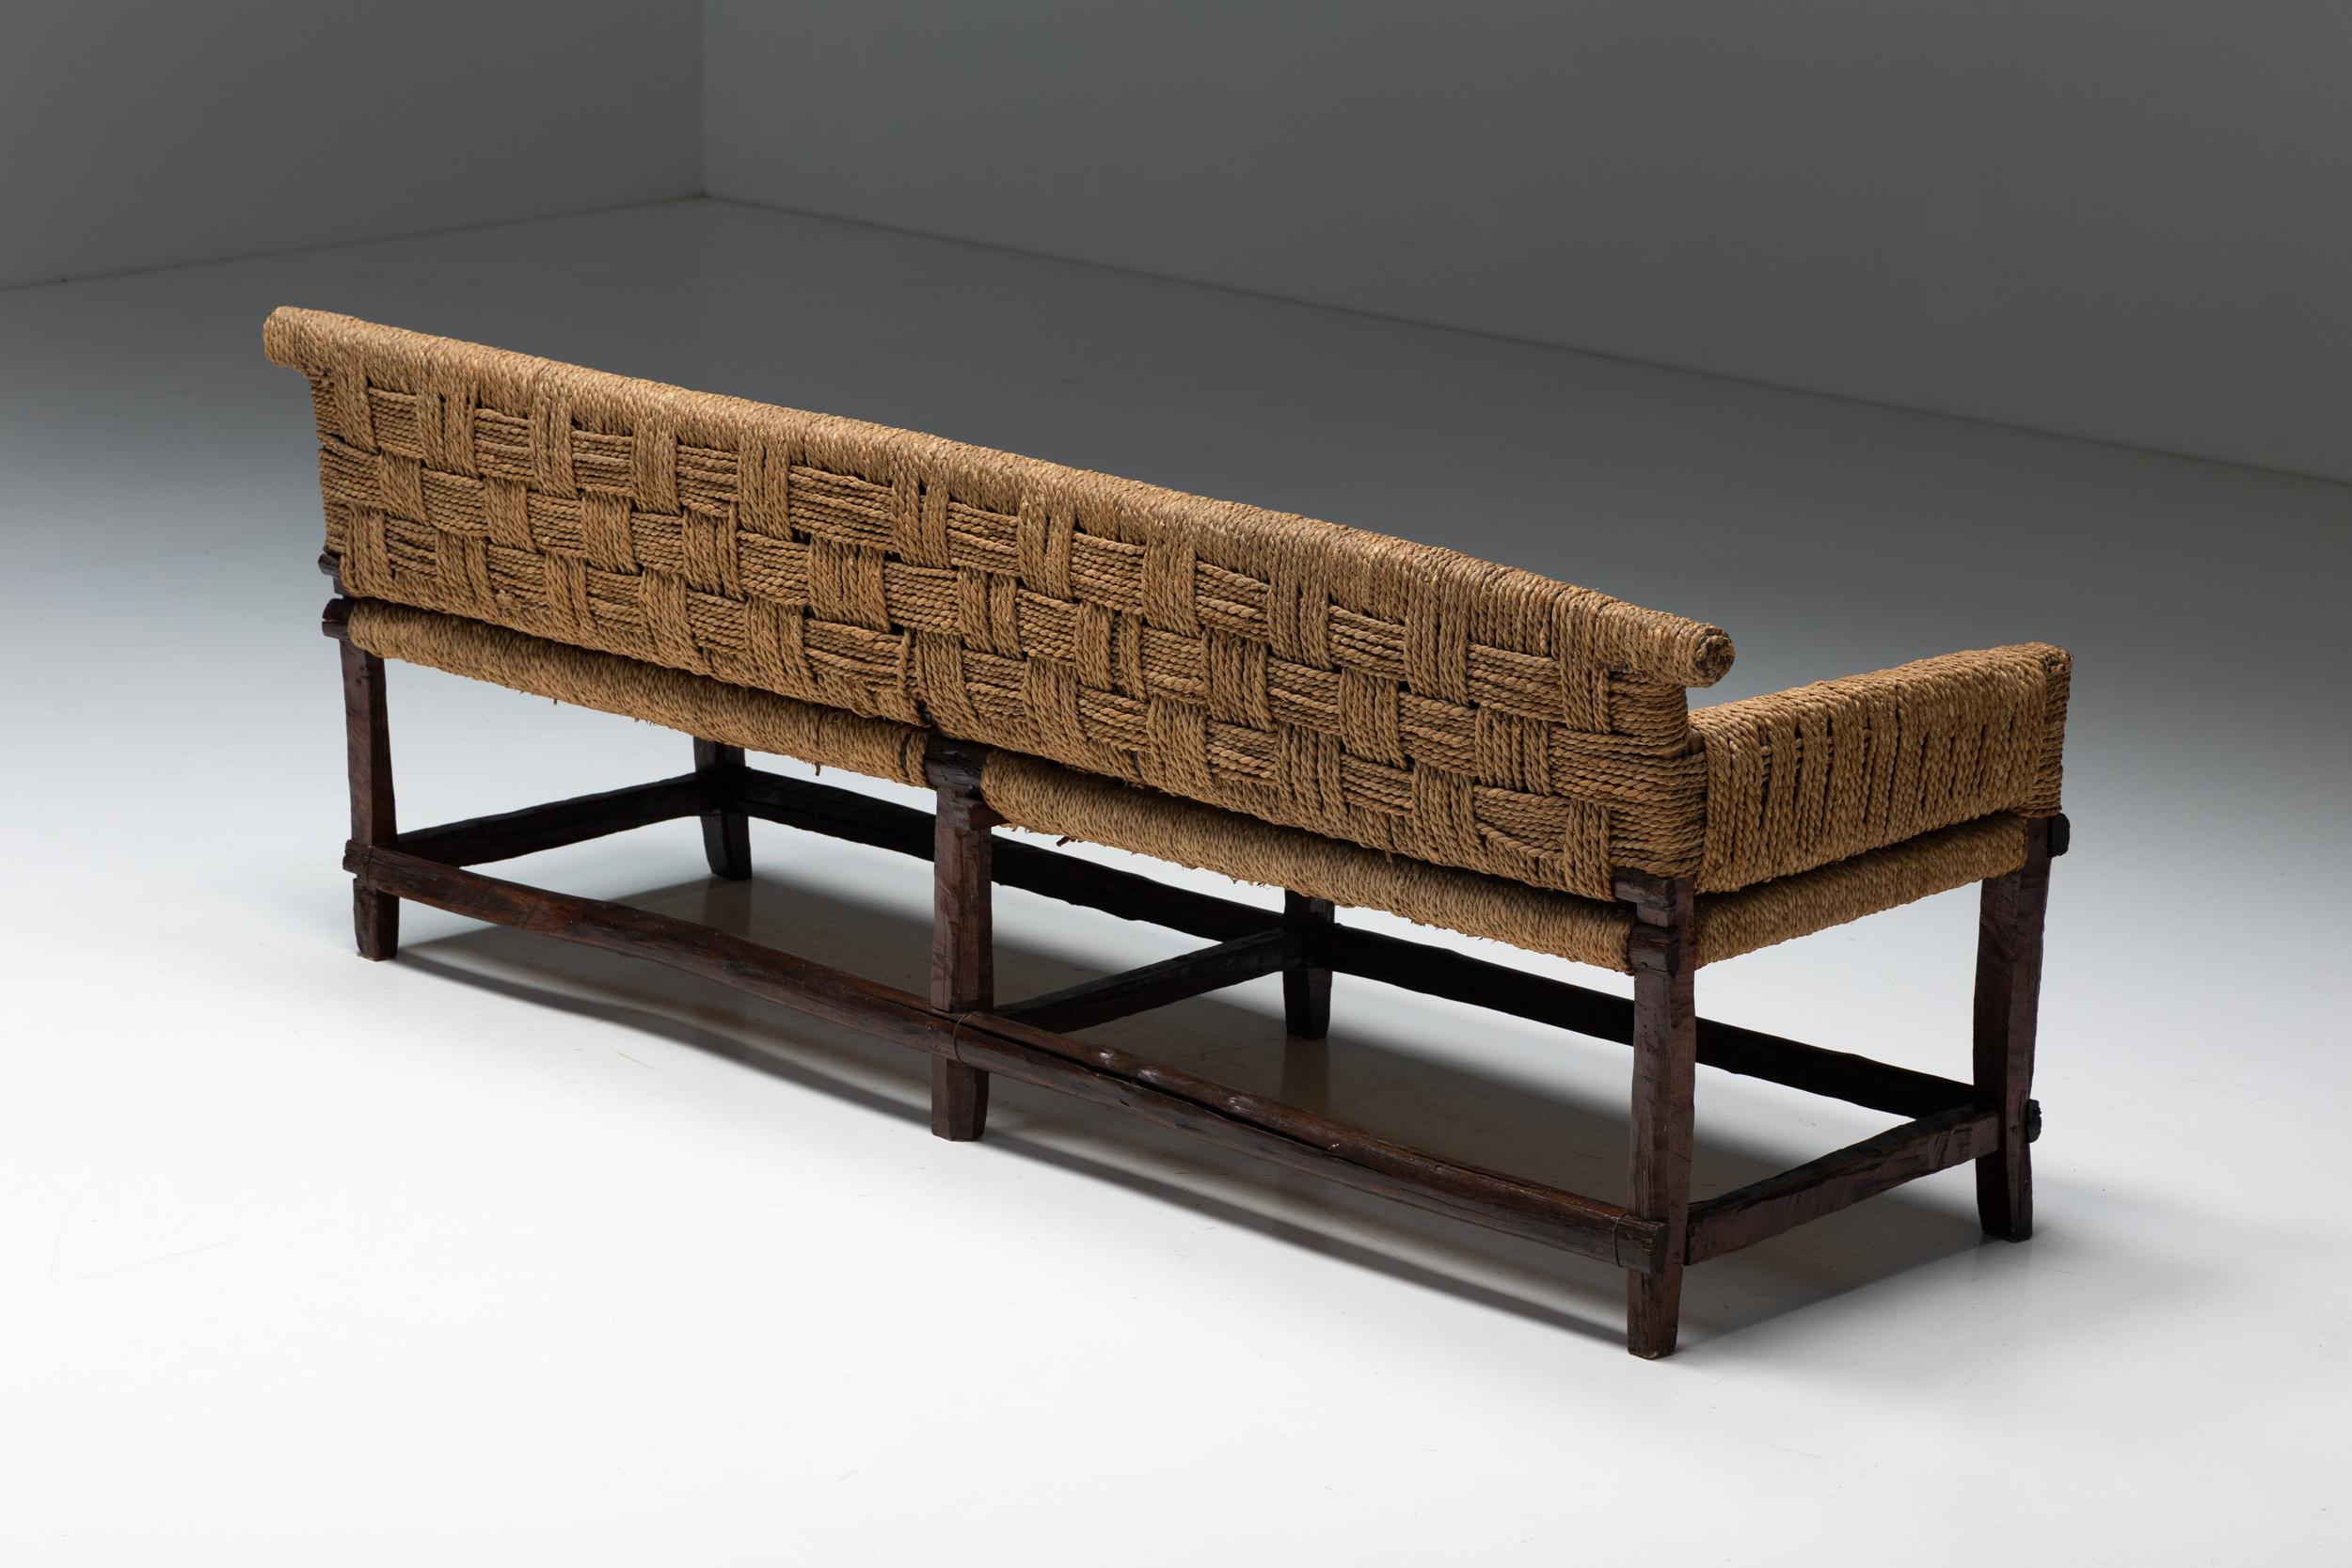 Woodwork Naive Folk Art Bench with Woven Seating, 1920s